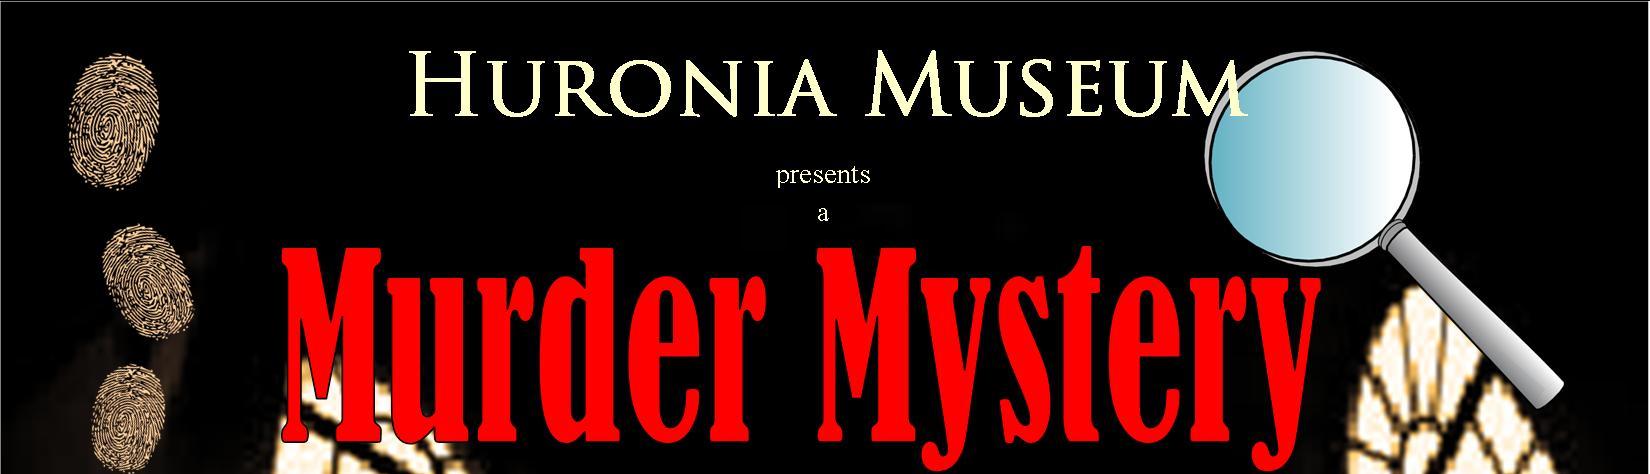 PRESS RELEASE: A Delicious Evening of Theatre and Murder Coming to Huronia Museum